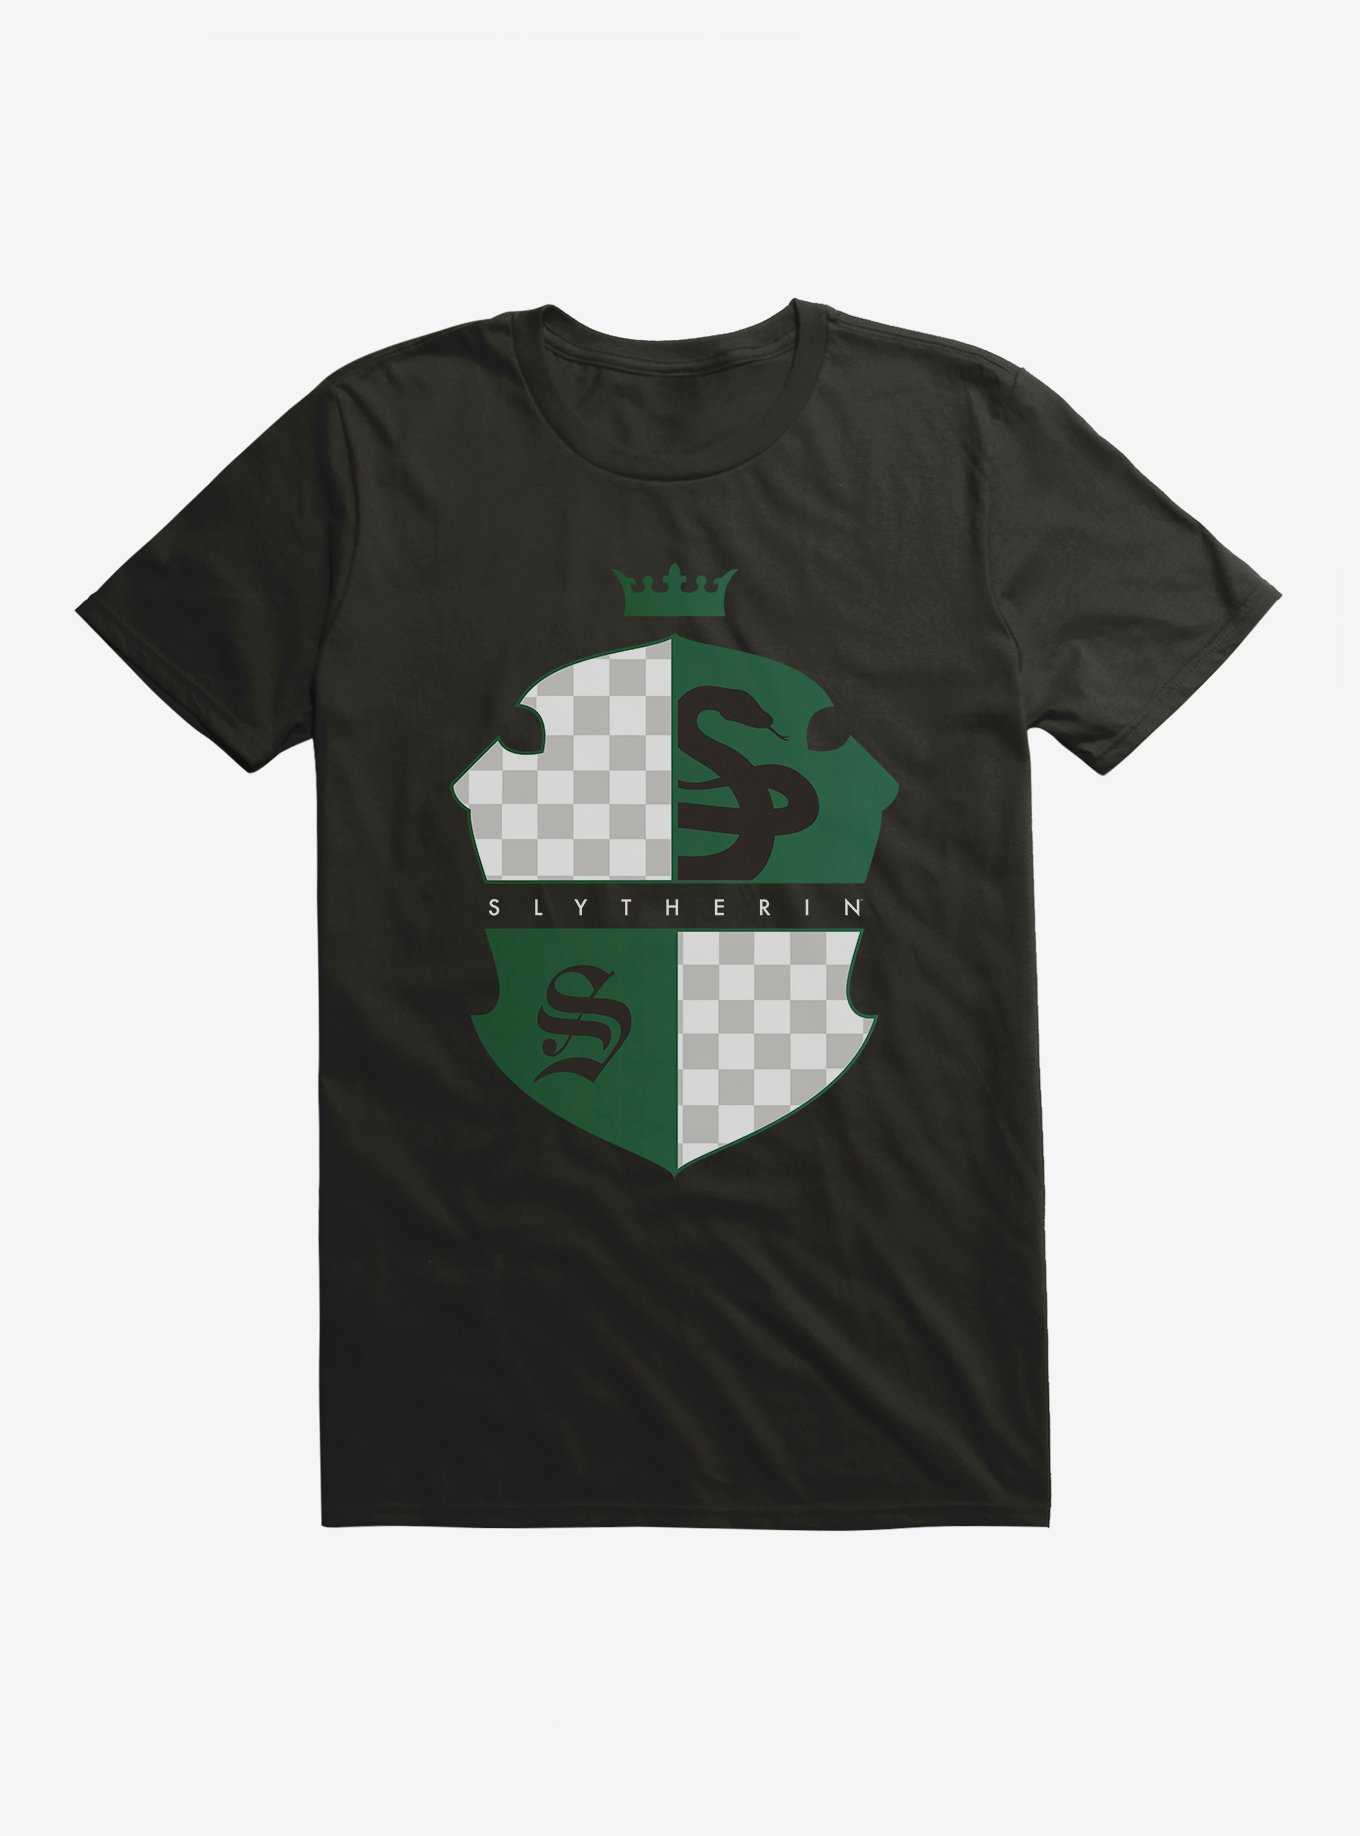 Harry Potter Slytherin Coat Of Arms T-Shirt, , hi-res